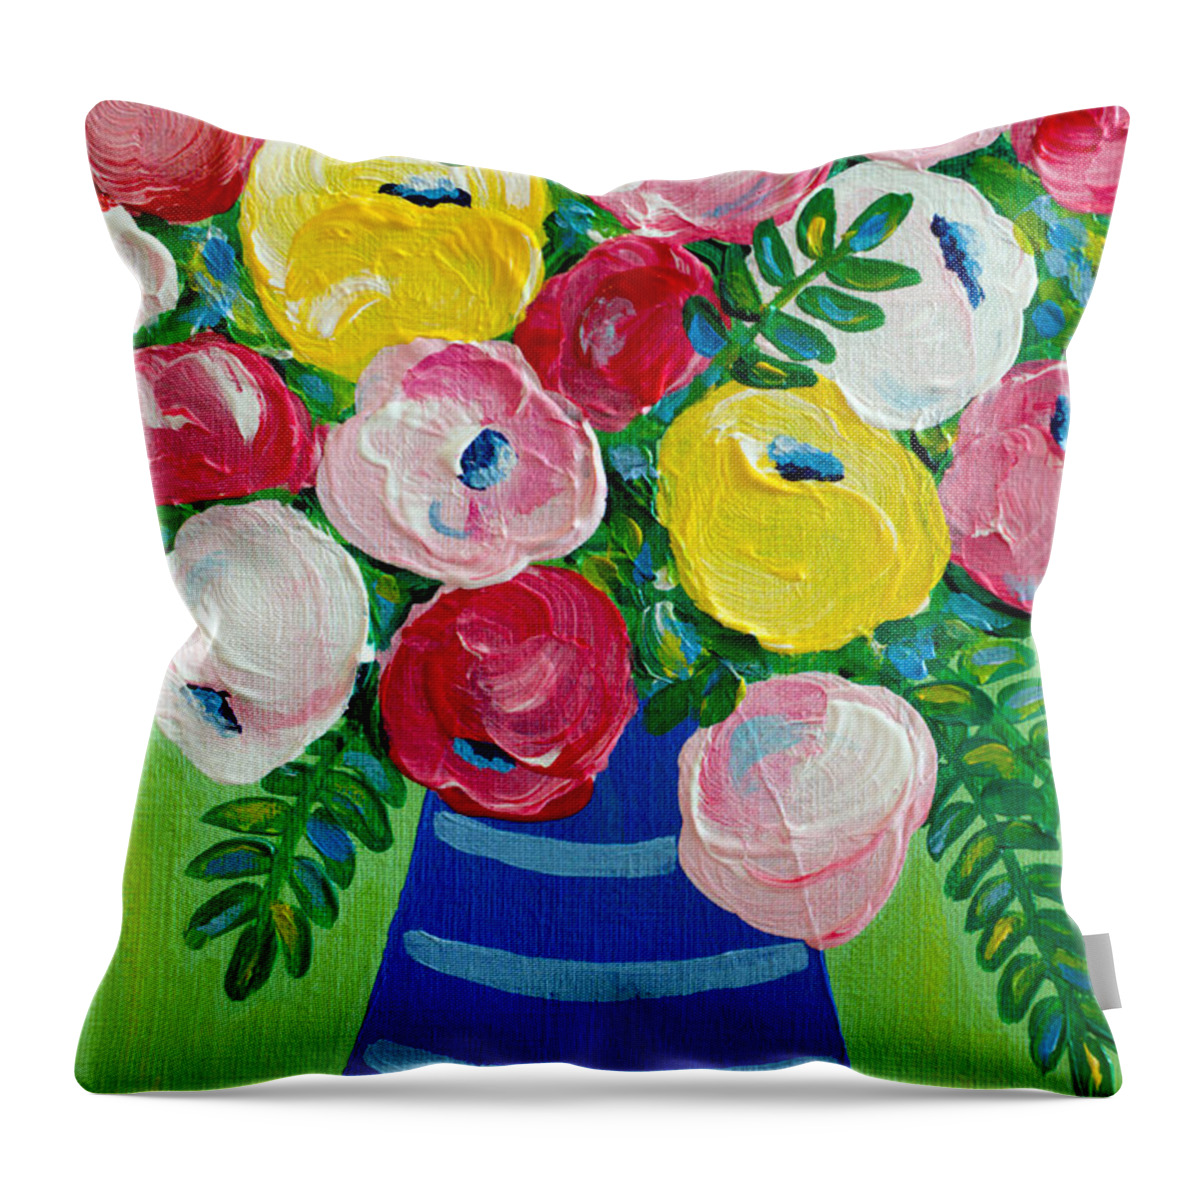 Floral Bouquet Throw Pillow featuring the painting Delightful by Beth Ann Scott